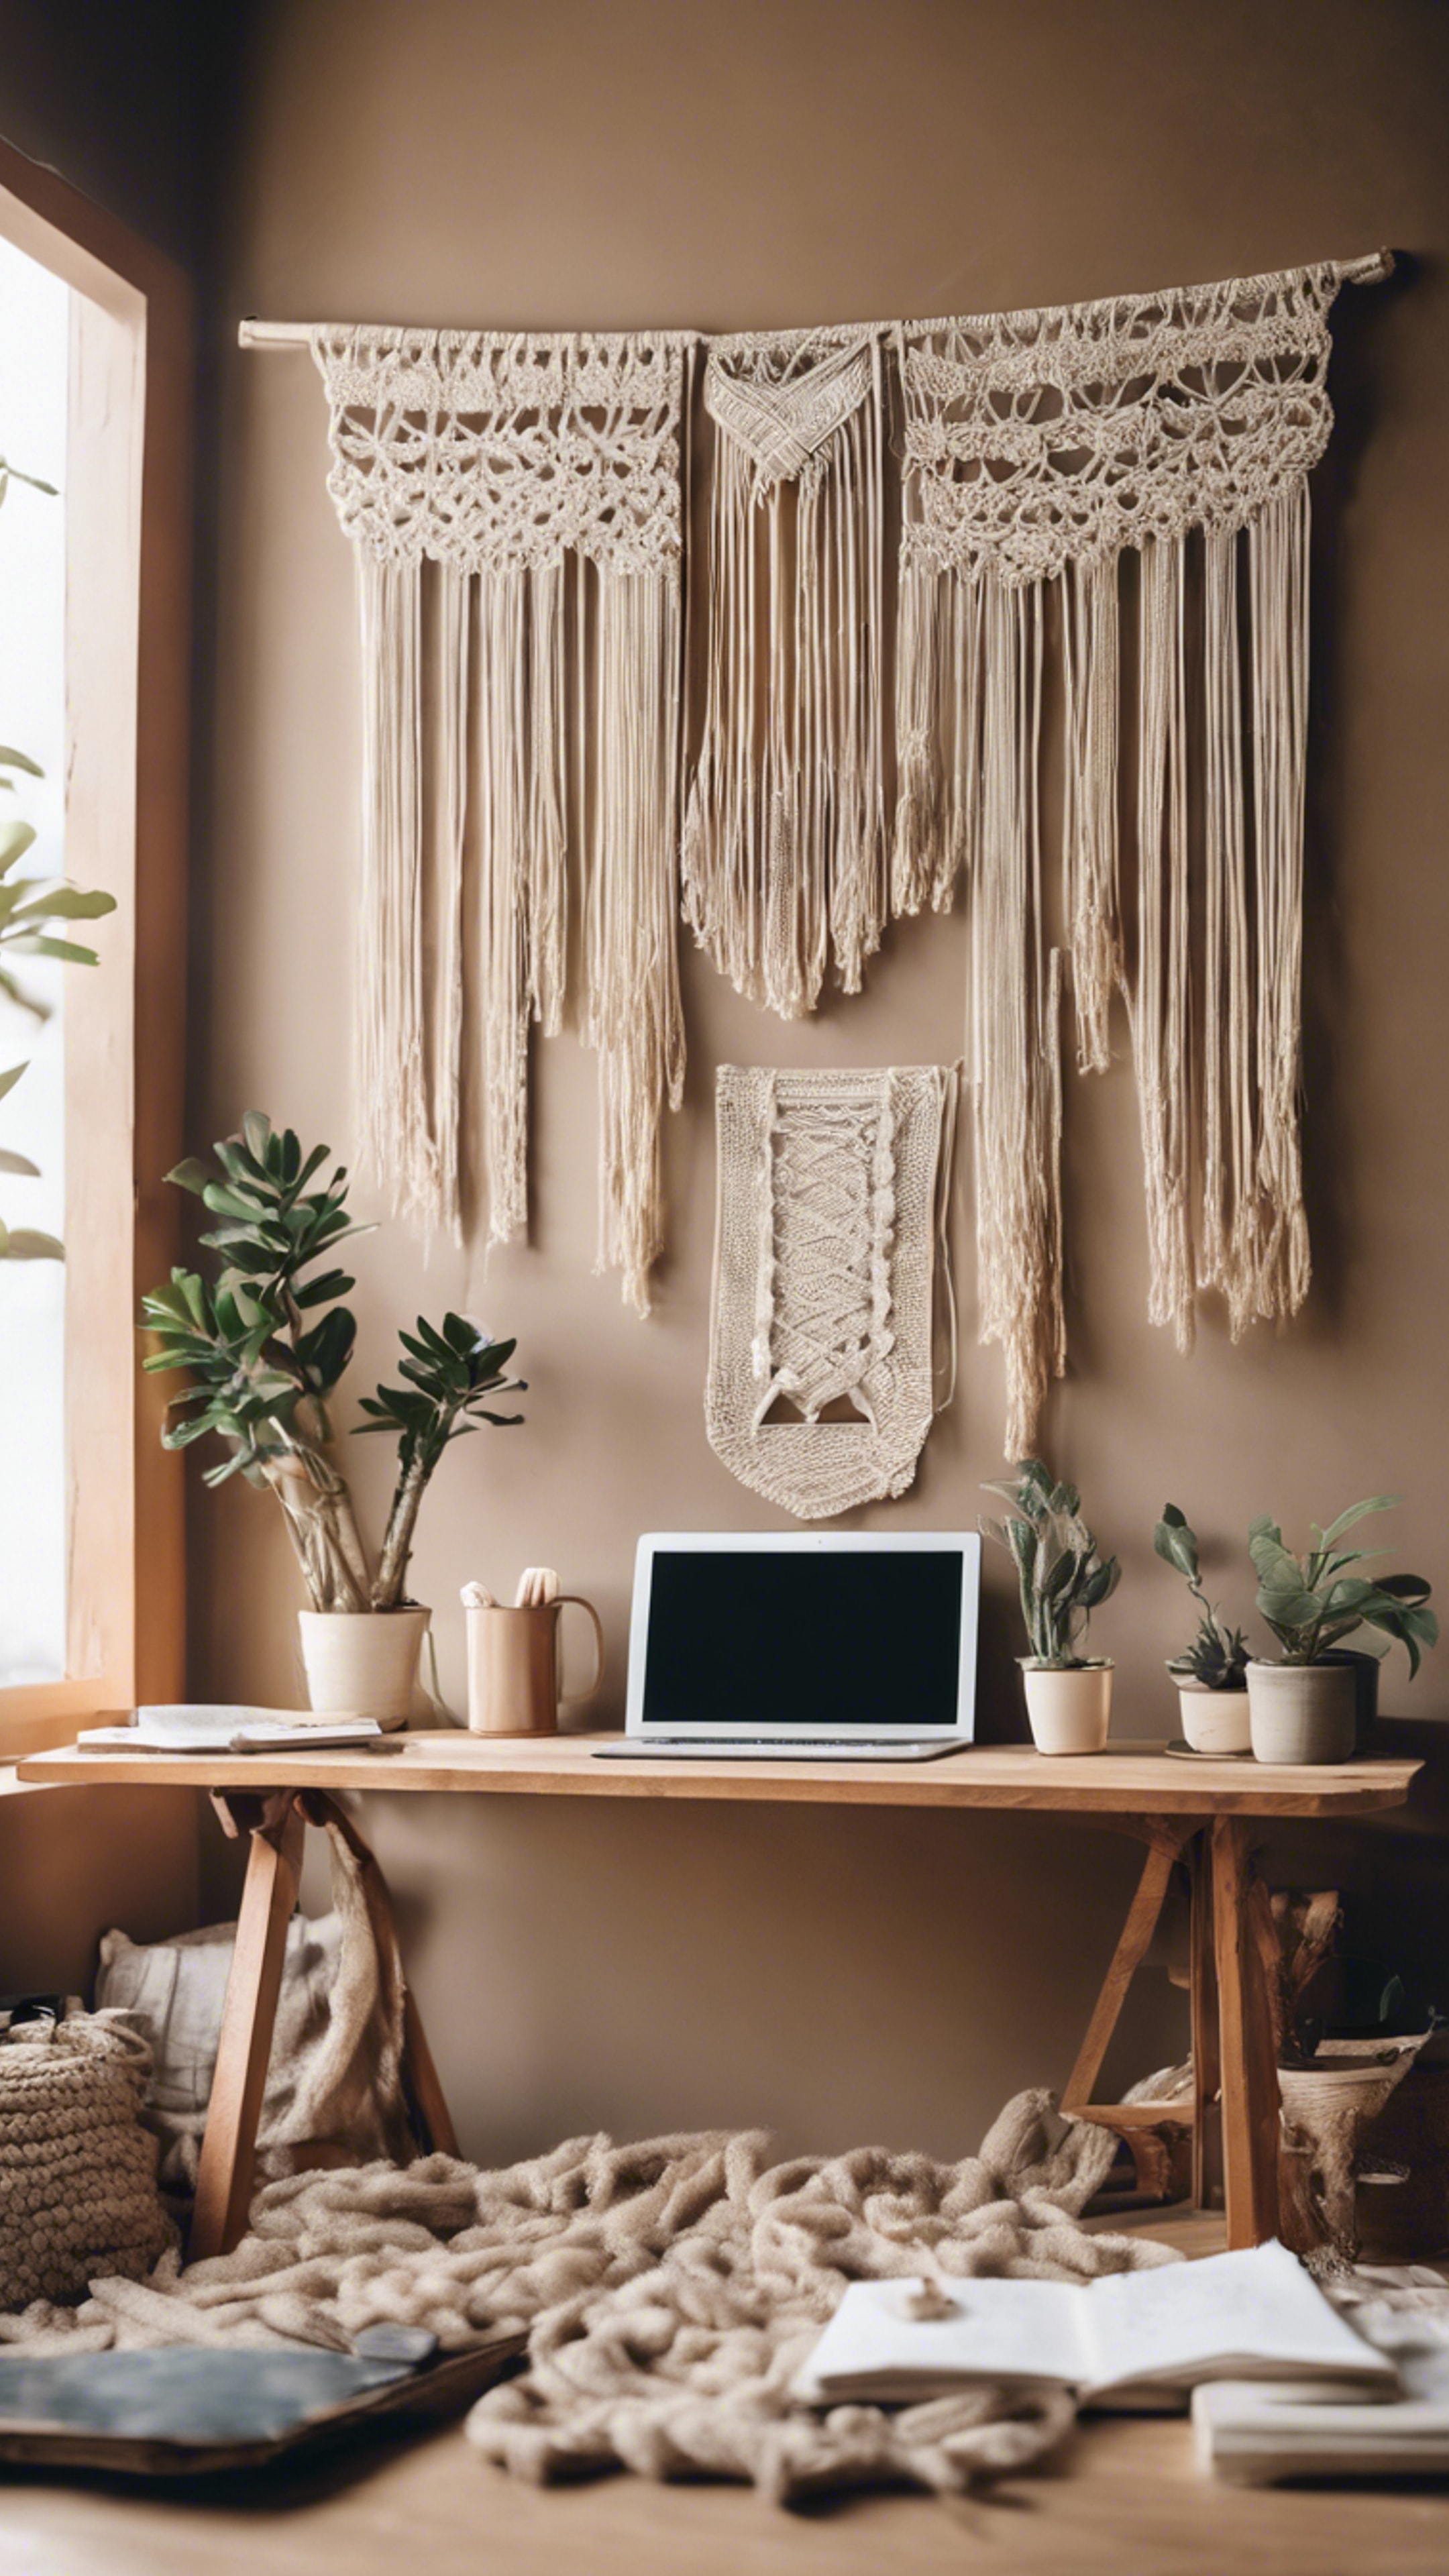 A neatly arranged workspace with beige tones, macrame wall hanging, and wooden desk.壁紙[e343d727e93c434c8f0c]